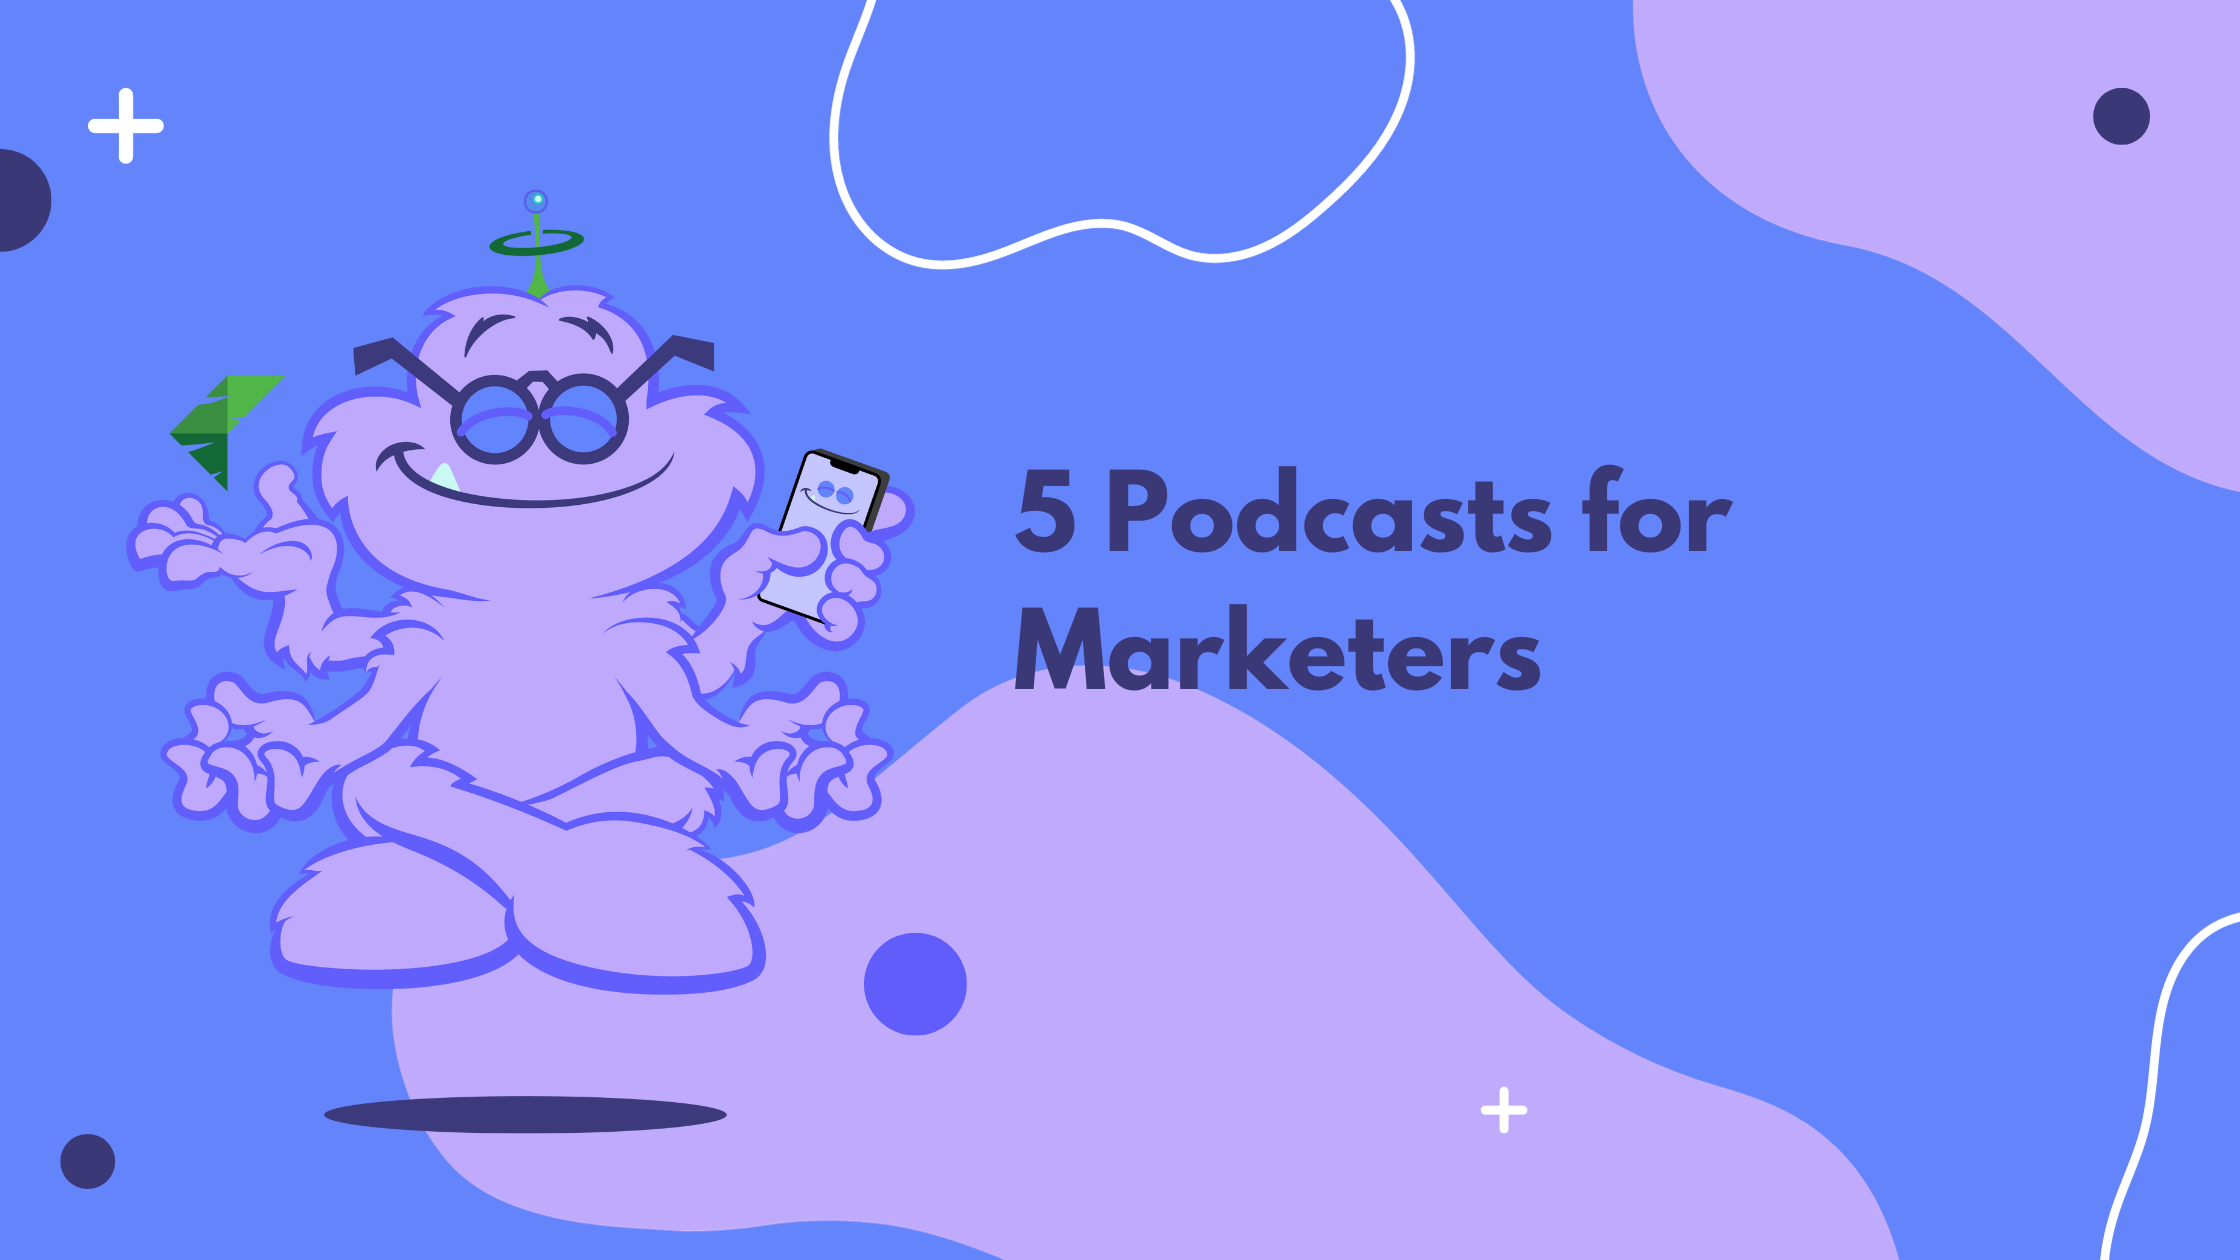 5 Podcasts for Marketers